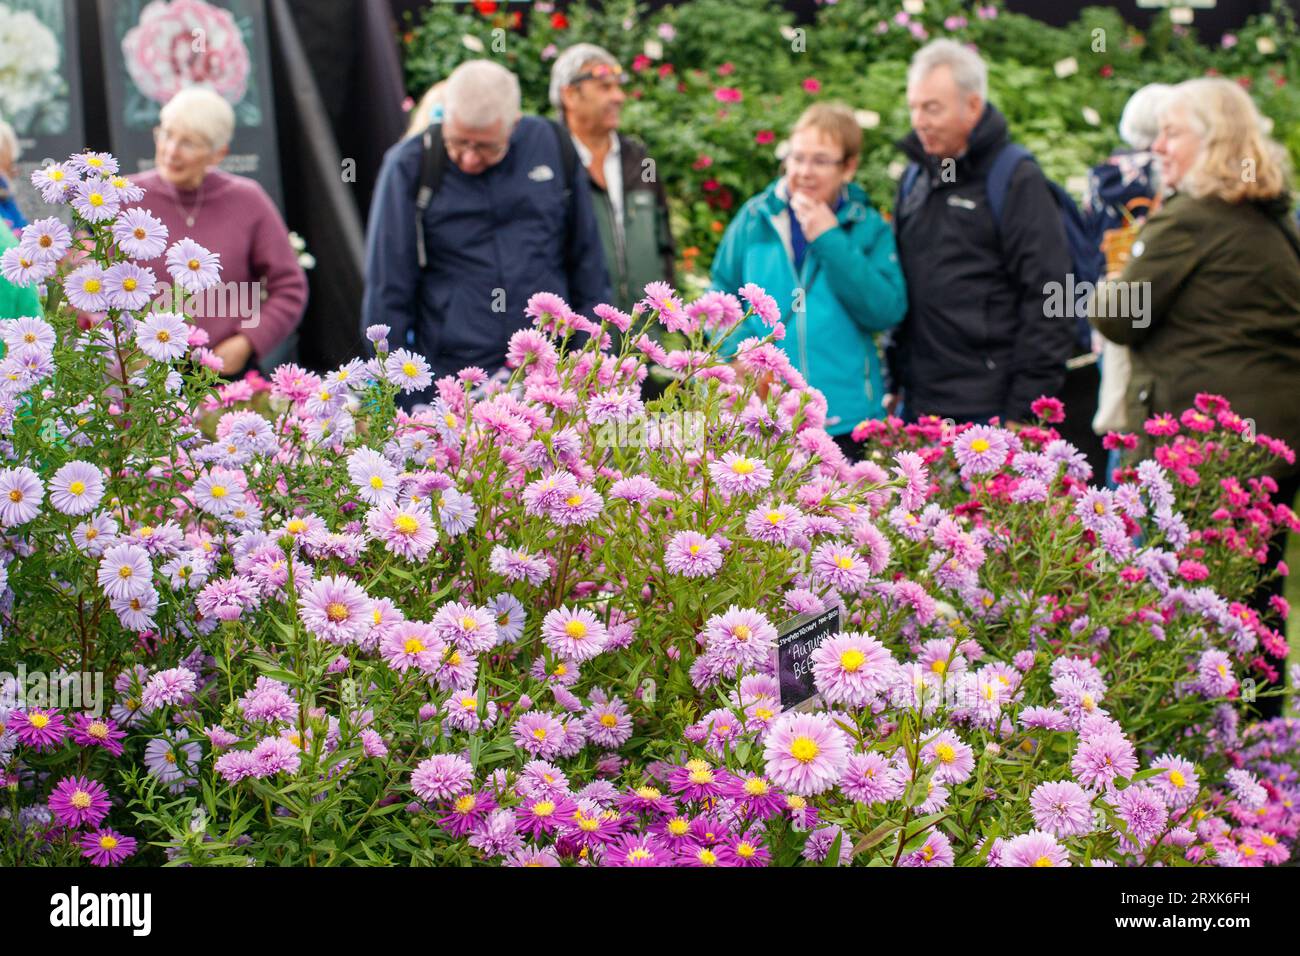 People admiring the flower displays in the Garden Theatre at the Malvern Autumnal Show. The Three day Malvern Autumn Show at the Three Counties Showground, Malvern, Worcestershire, England, UK. Stock Photo